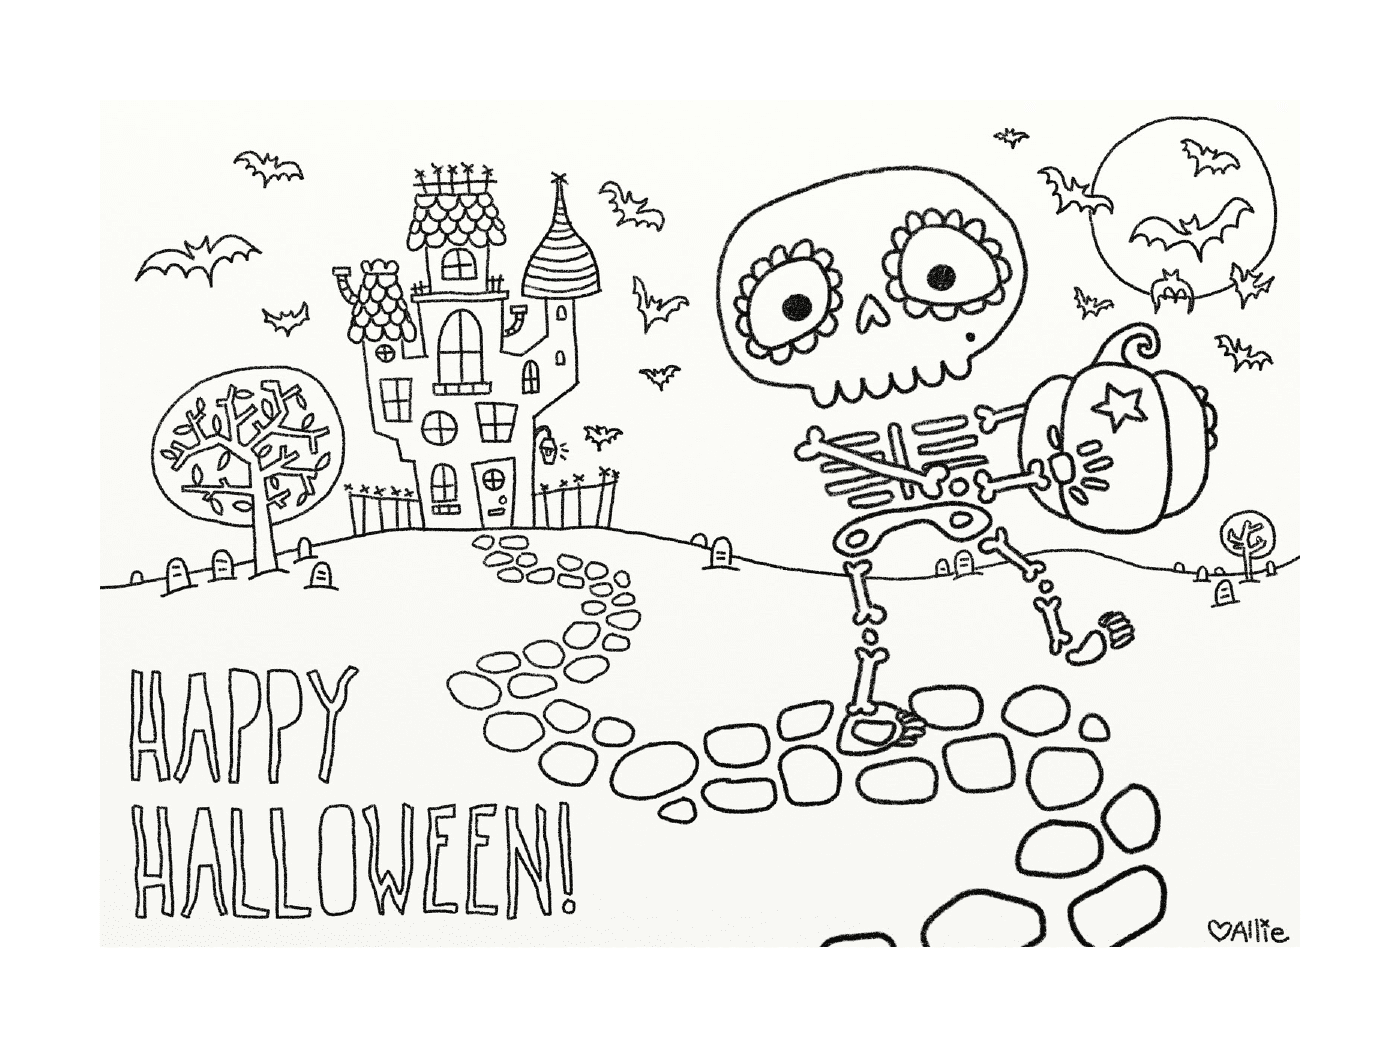  skeleton and scary castle 